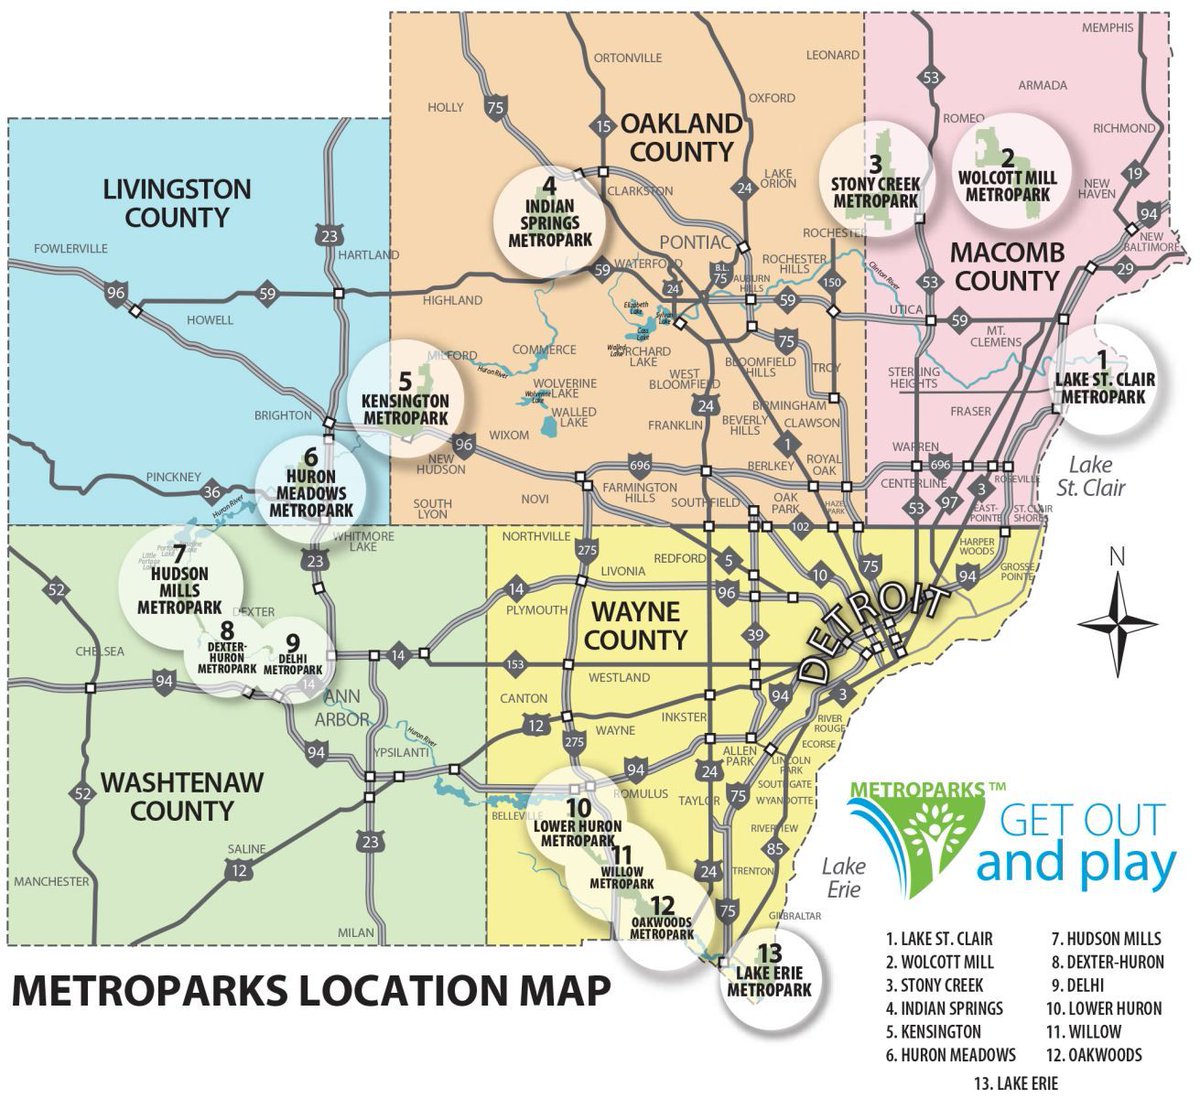 Happy Earth Day! I'm gonna do a little dive into our Huron-Clinton Metropark system. It's one of the most overlooked and successful conservation efforts in our area, one of our better examples of regionalism, and another example of environmental racism re: park access